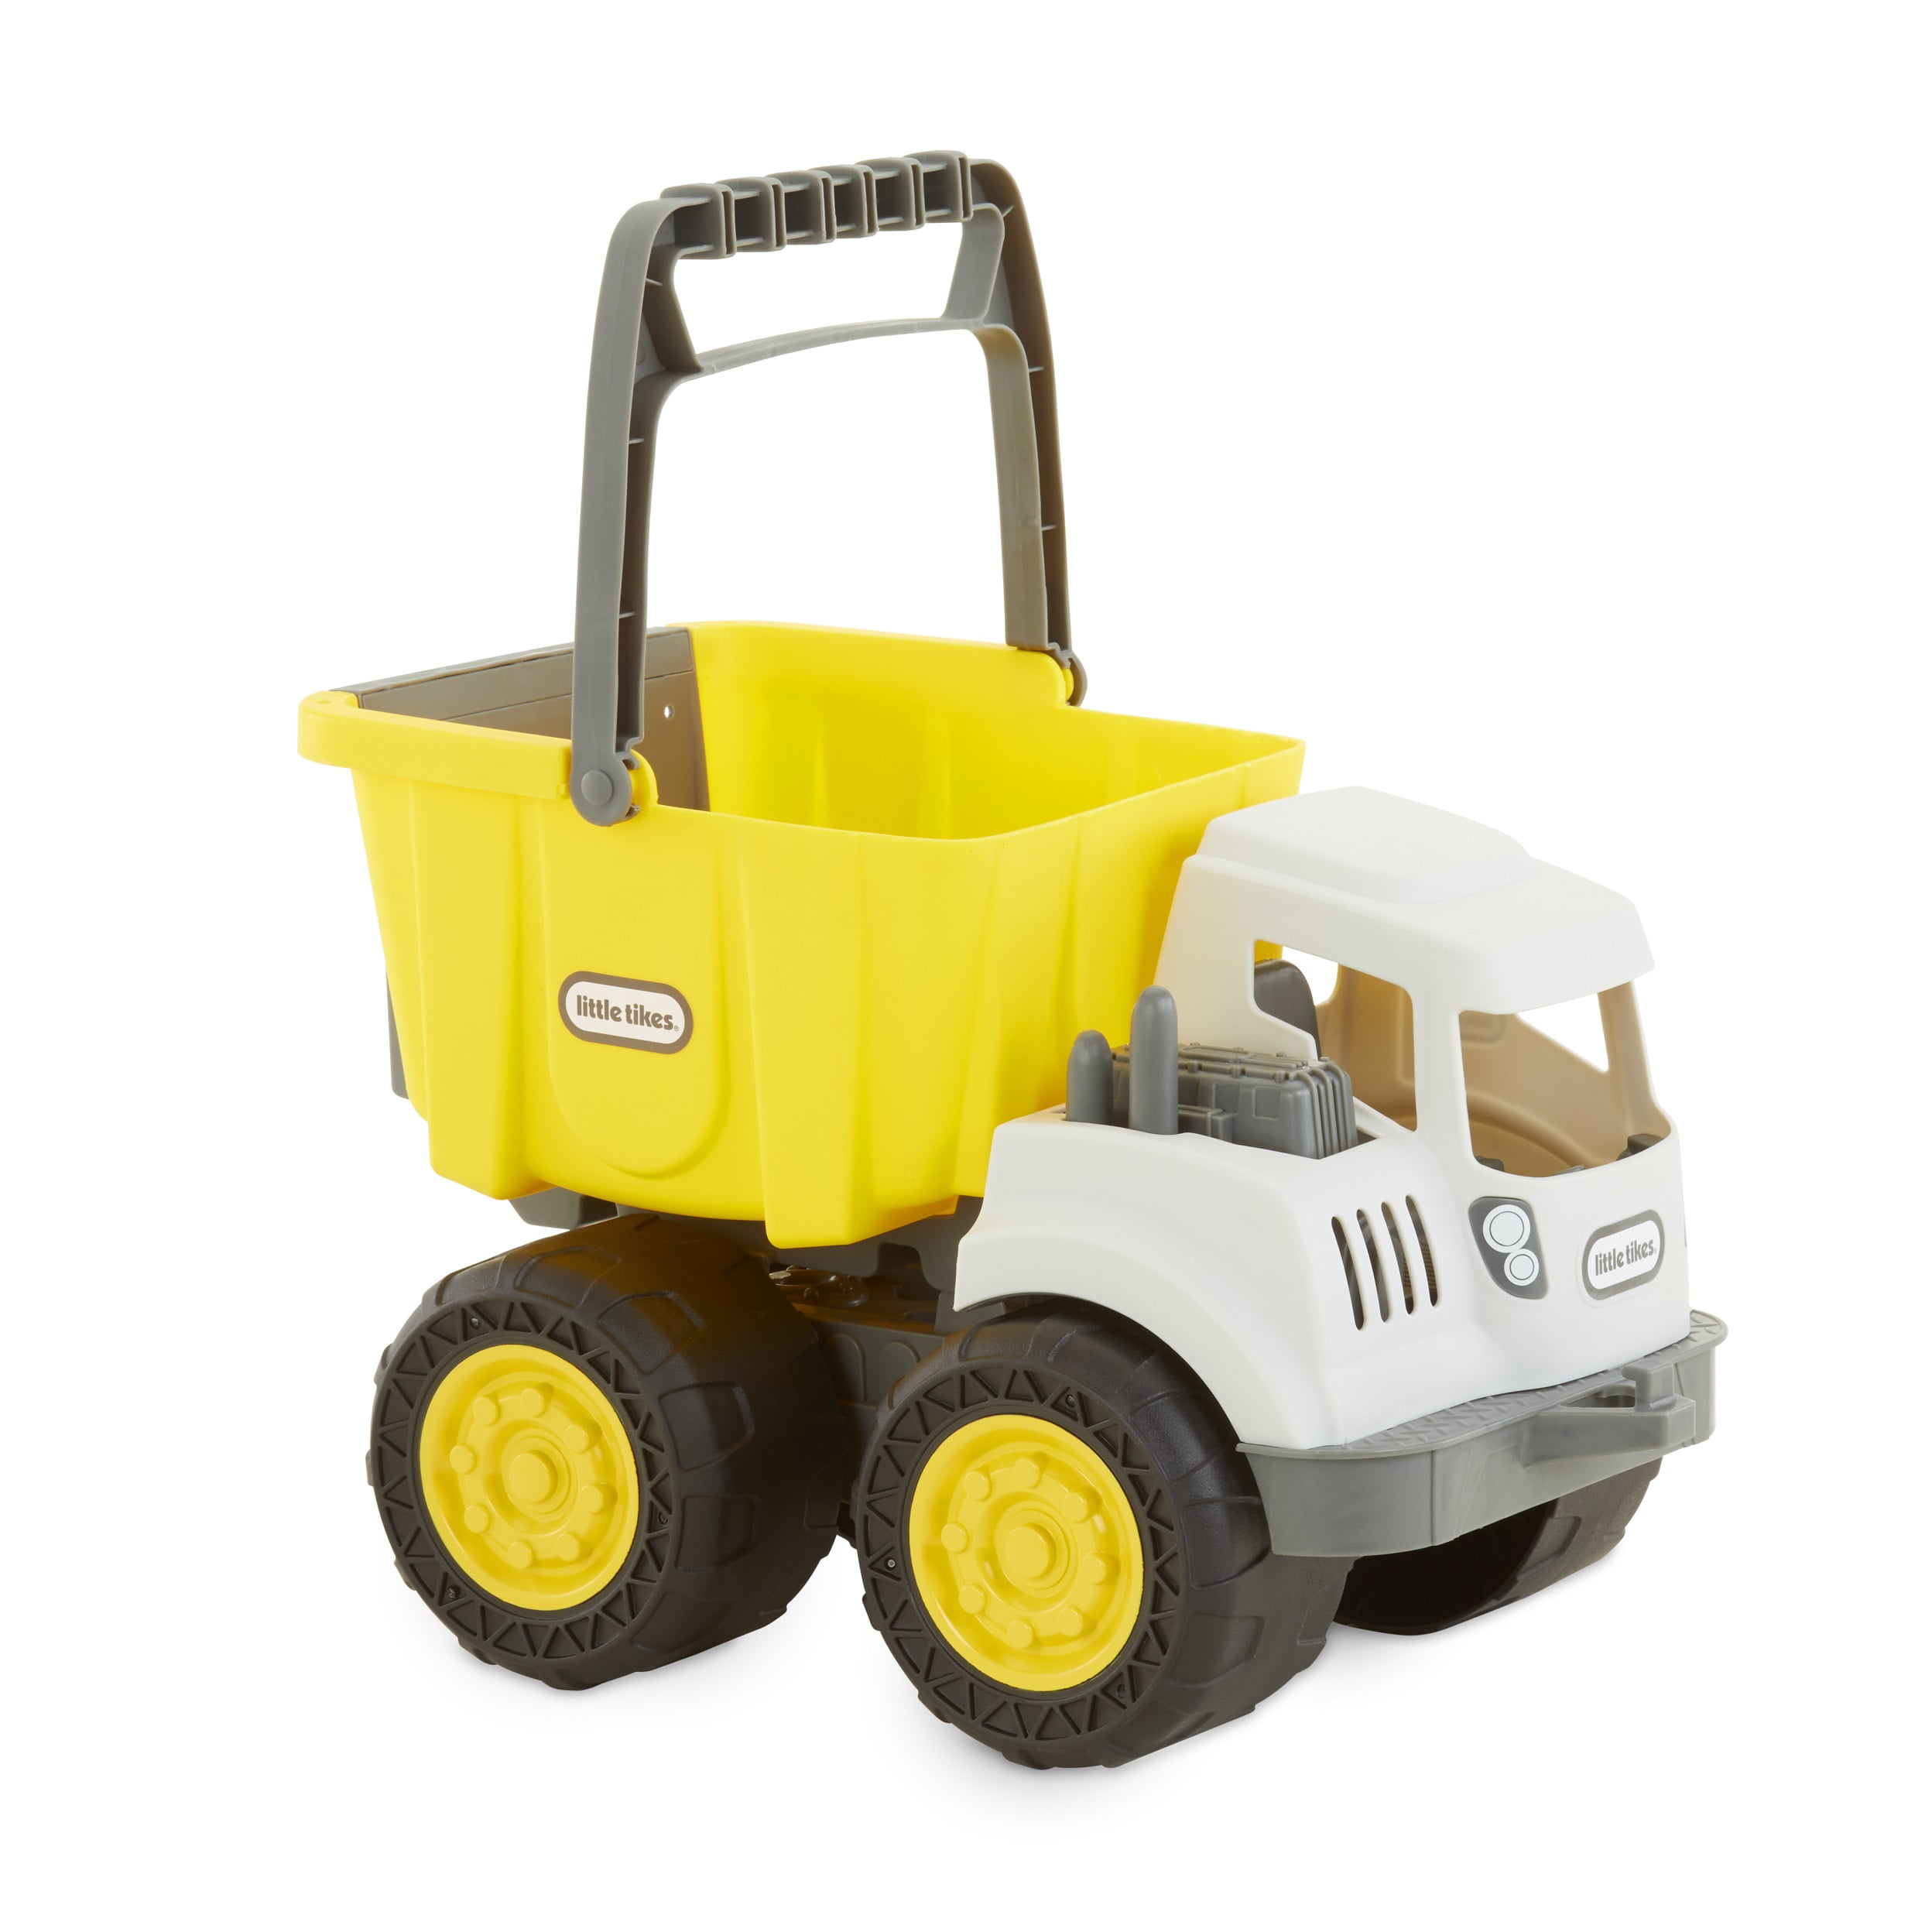 Little Tikes Dirt Diggers 2-in-1 Dump Truck, Toy Play Vehicle with Removable Bucket, Indoor Outdoor Pretend Play, Yellow - For Kids & Toddlers, Boys & Girls Ages 2 3 4+ Year Old